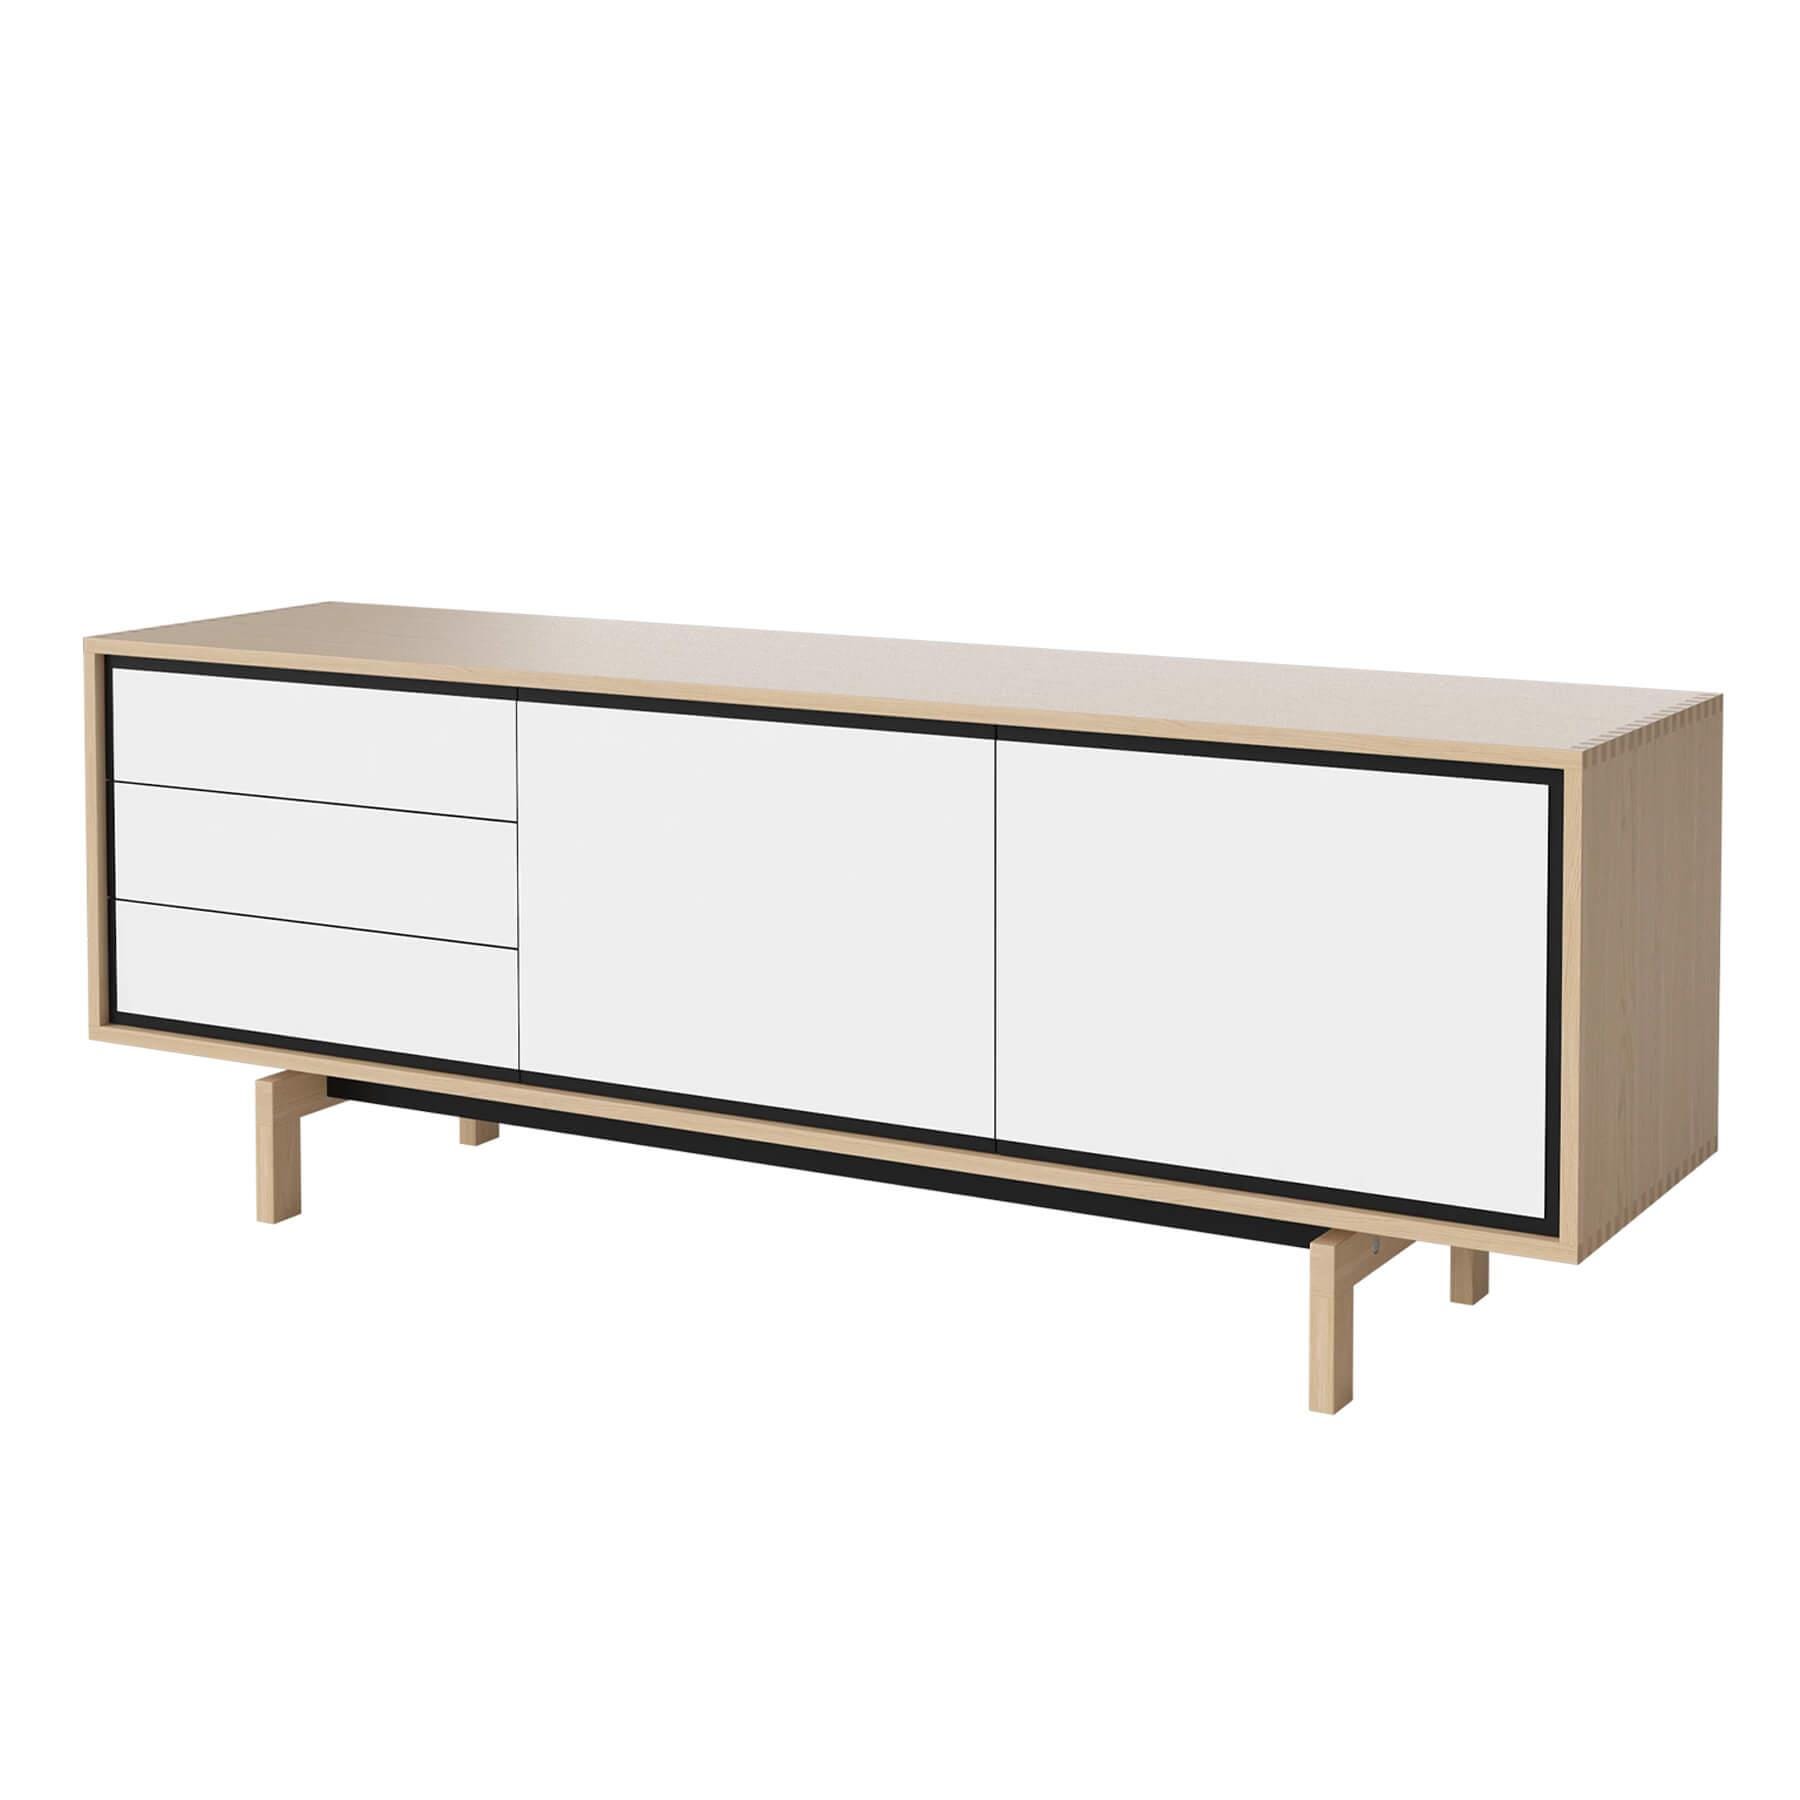 Bolia Floow Sideboard Large White Oiled Oak With White Laminate Light Wood Designer Furniture From Holloways Of Ludlow